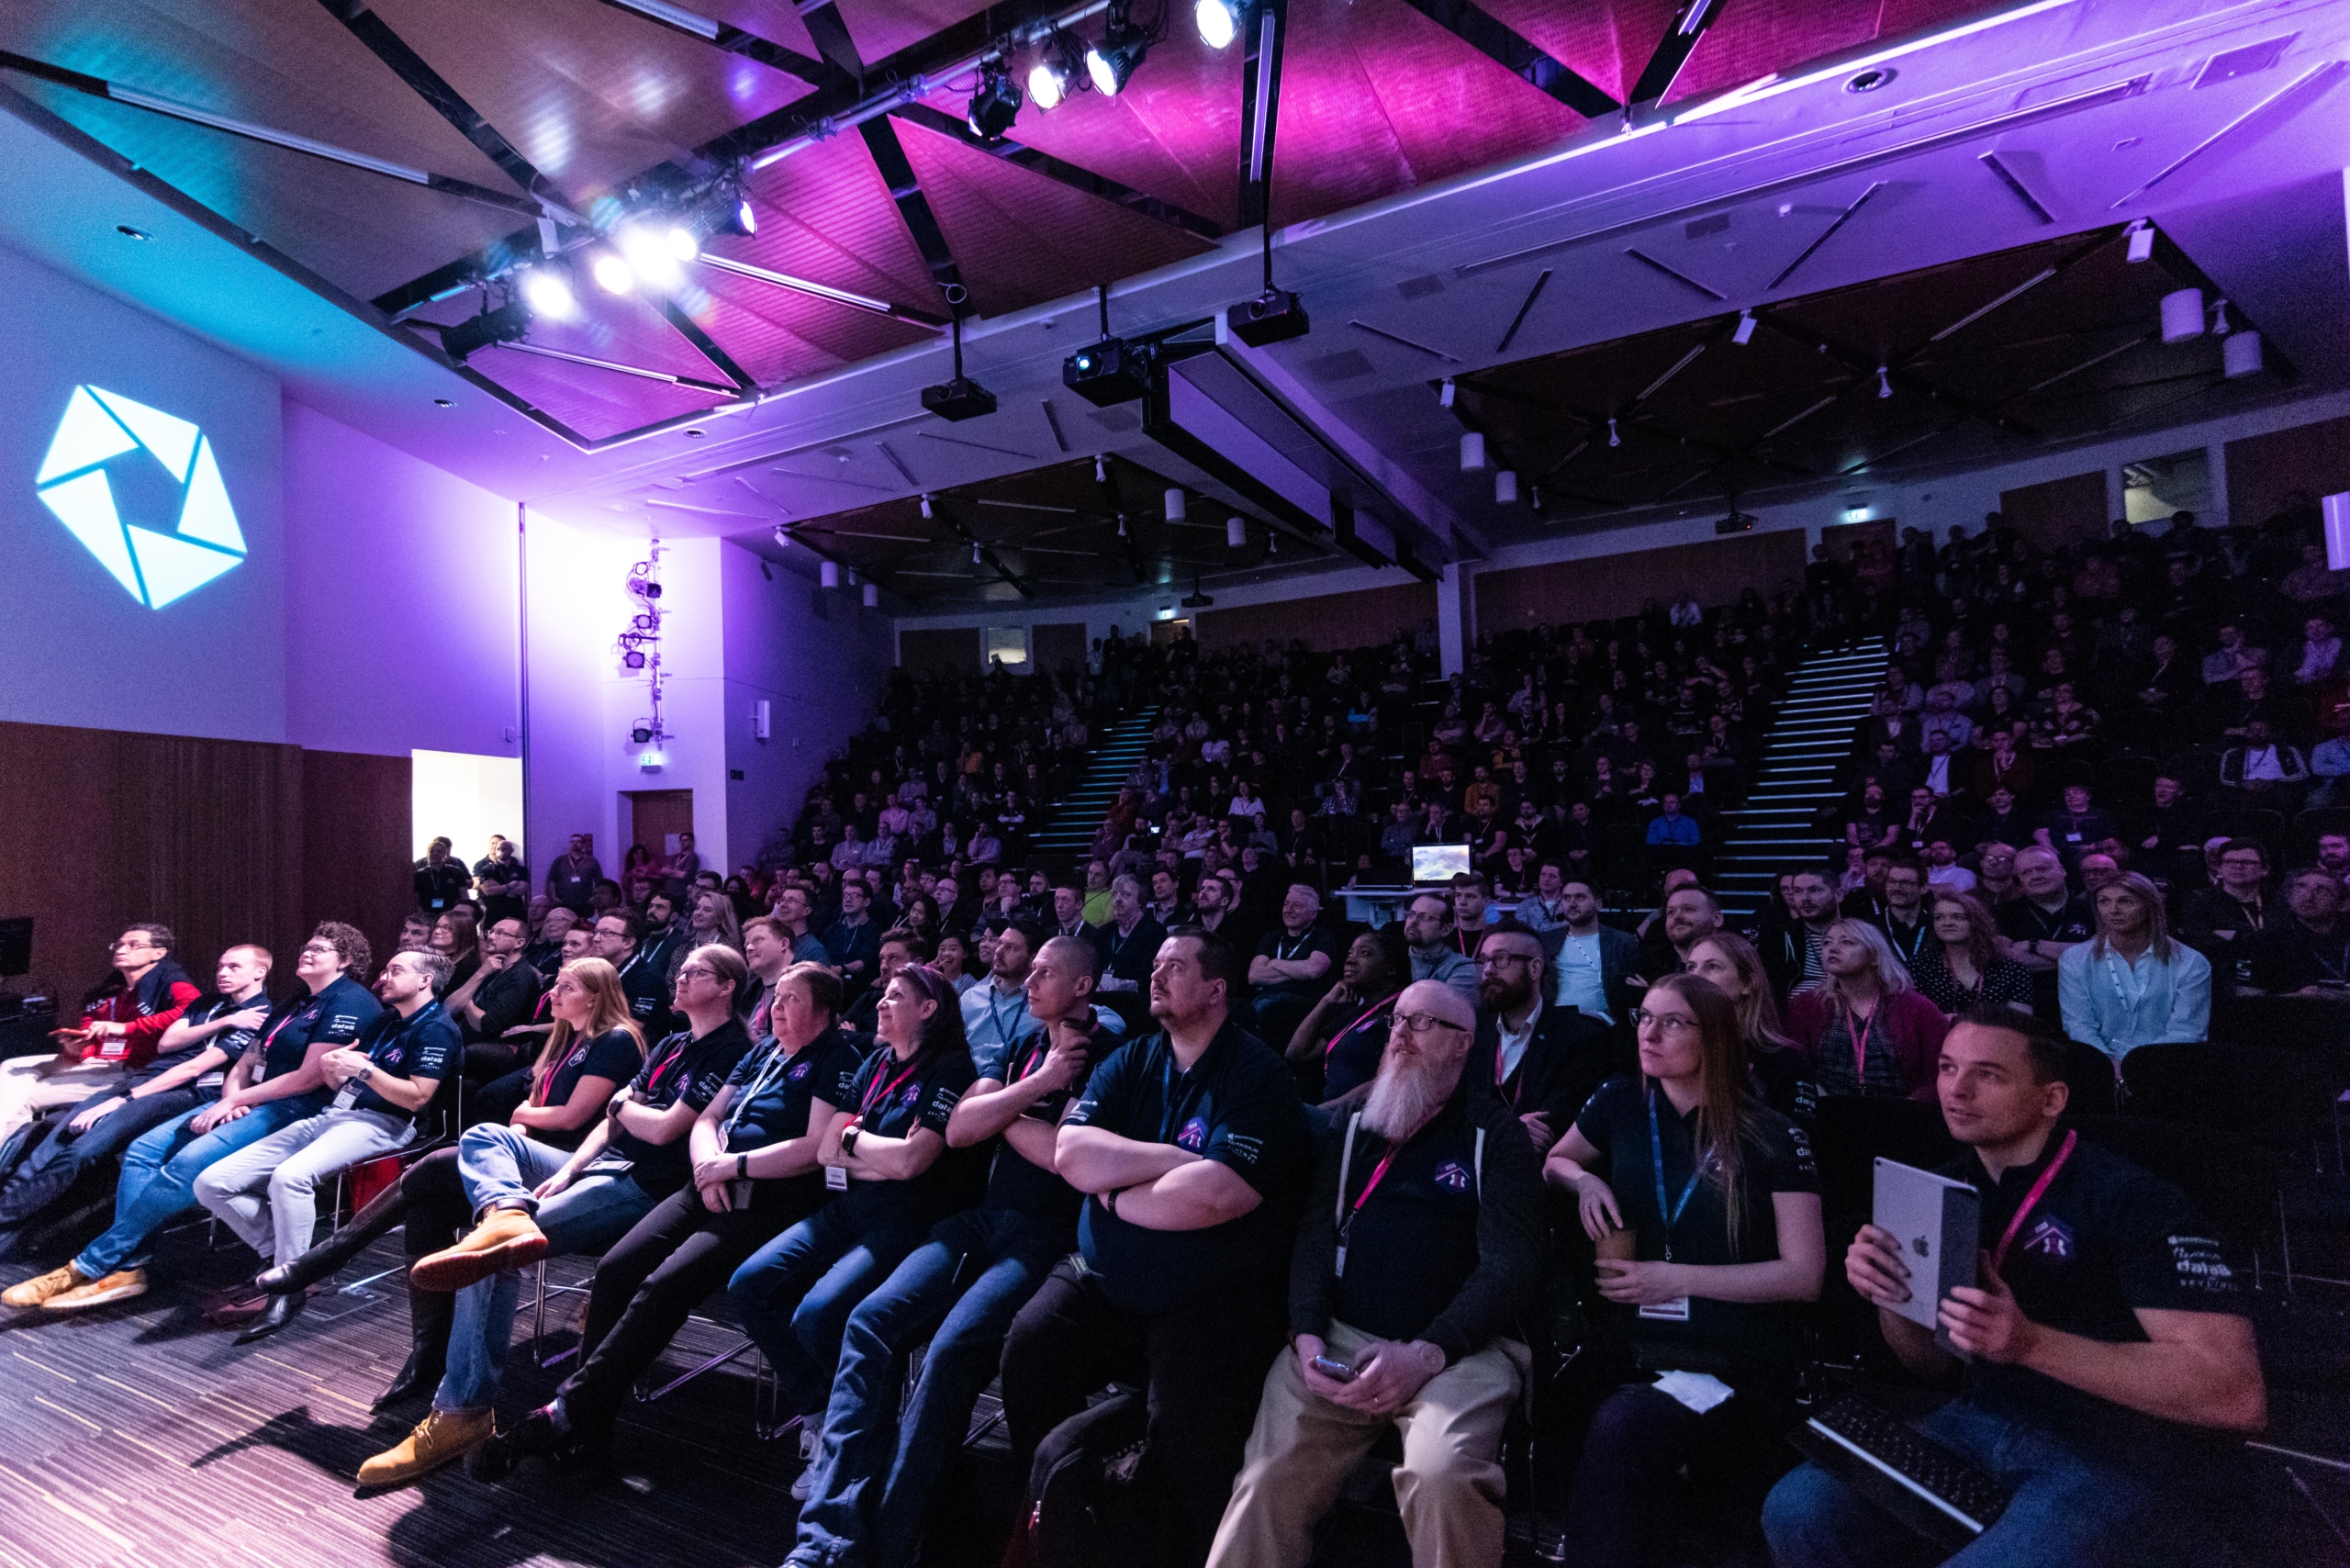 A photo of a large audience in a seminar room, taken at Scottish Summit 2020.